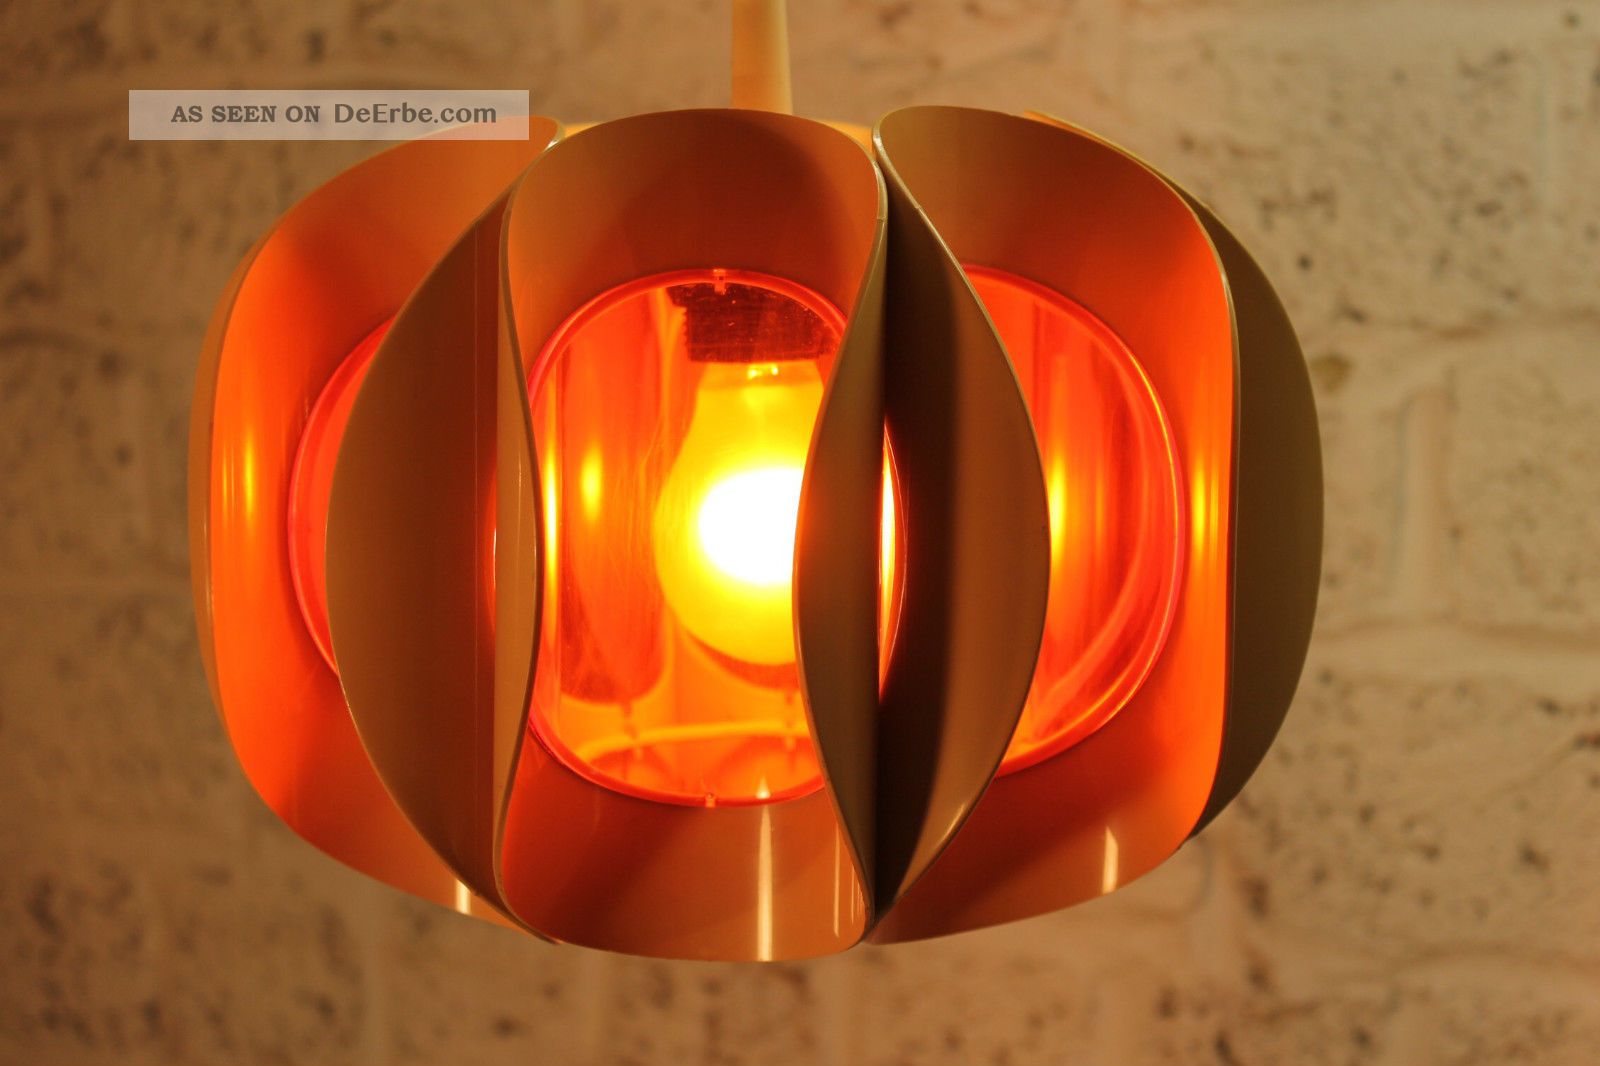 70s space age lamp